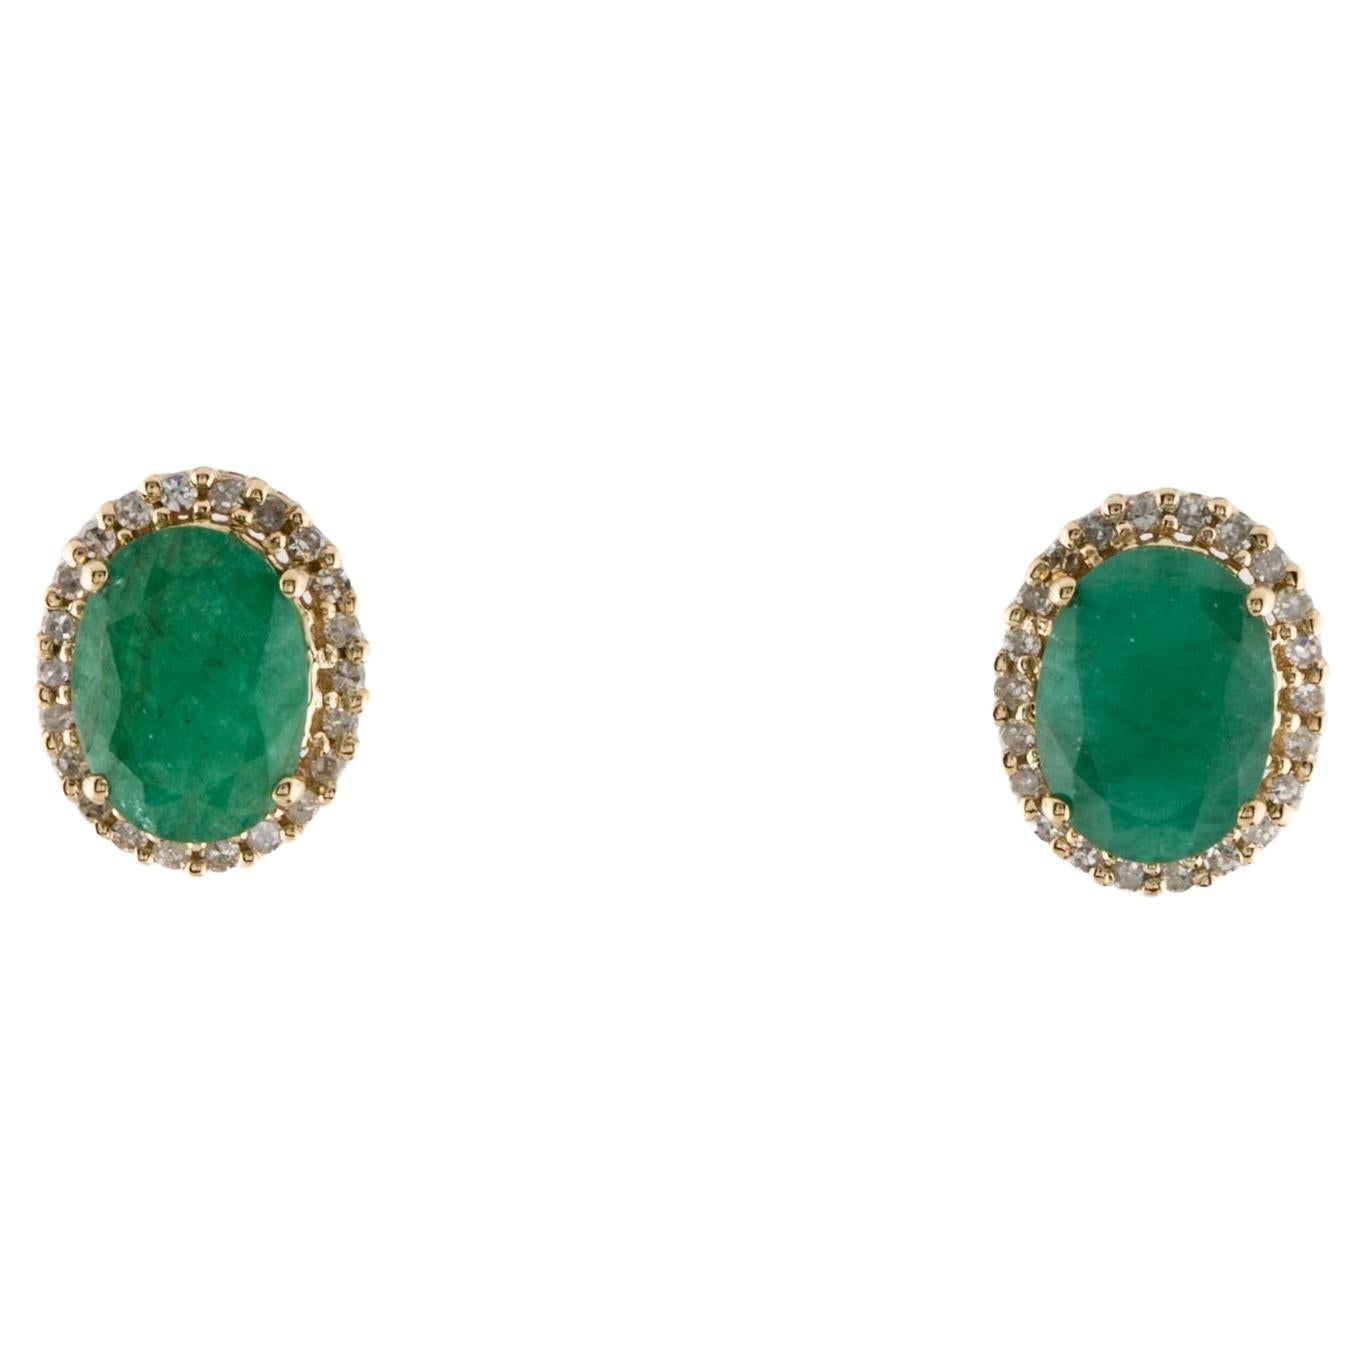 14K Yellow Gold Stud Earrings with 2.08ctw Oval Emeralds and Diamond Accents